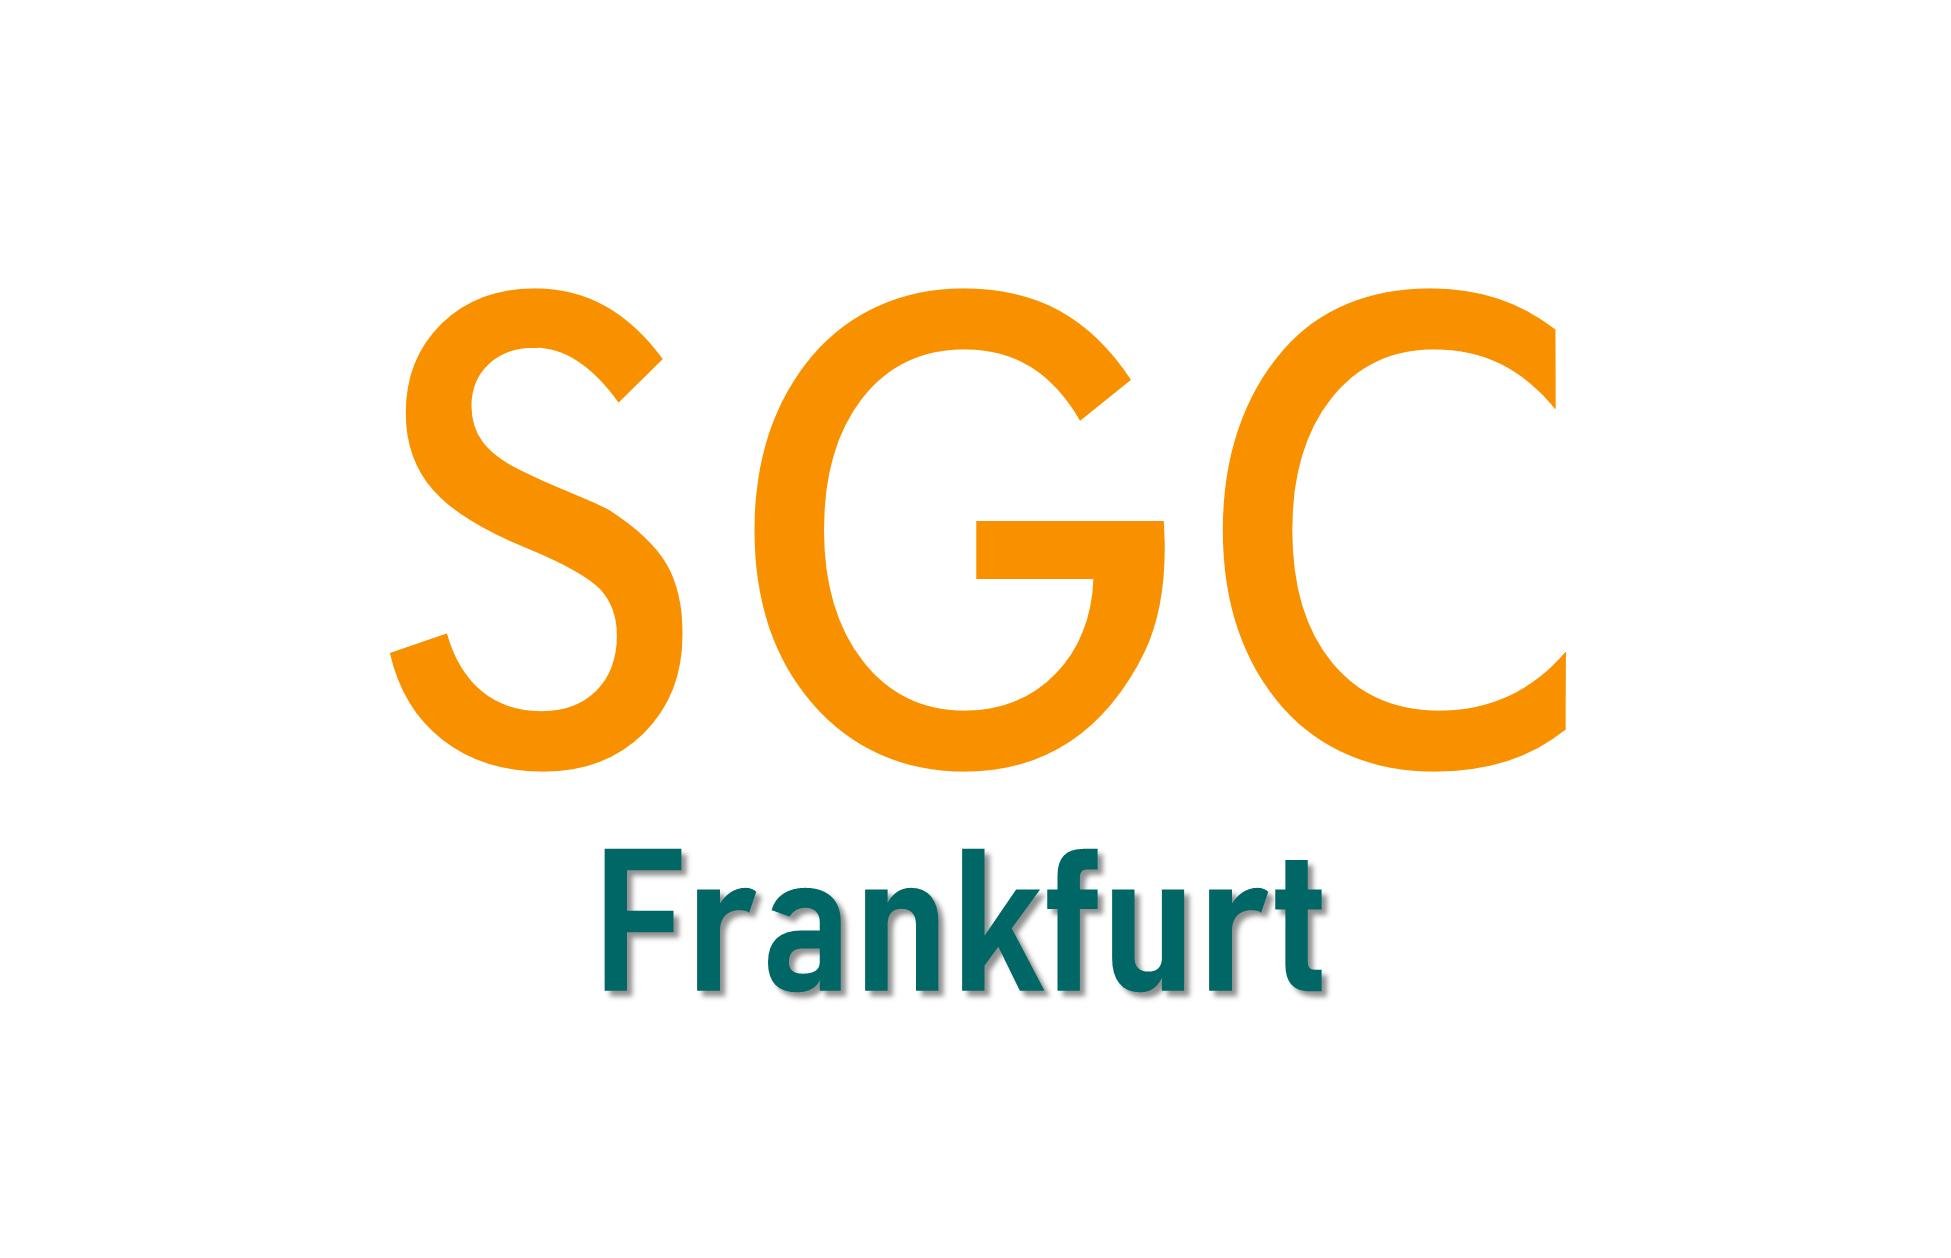 At SGC Frankfurt we develop selective inhibitors for the validation of new targets. We share our science with the community!